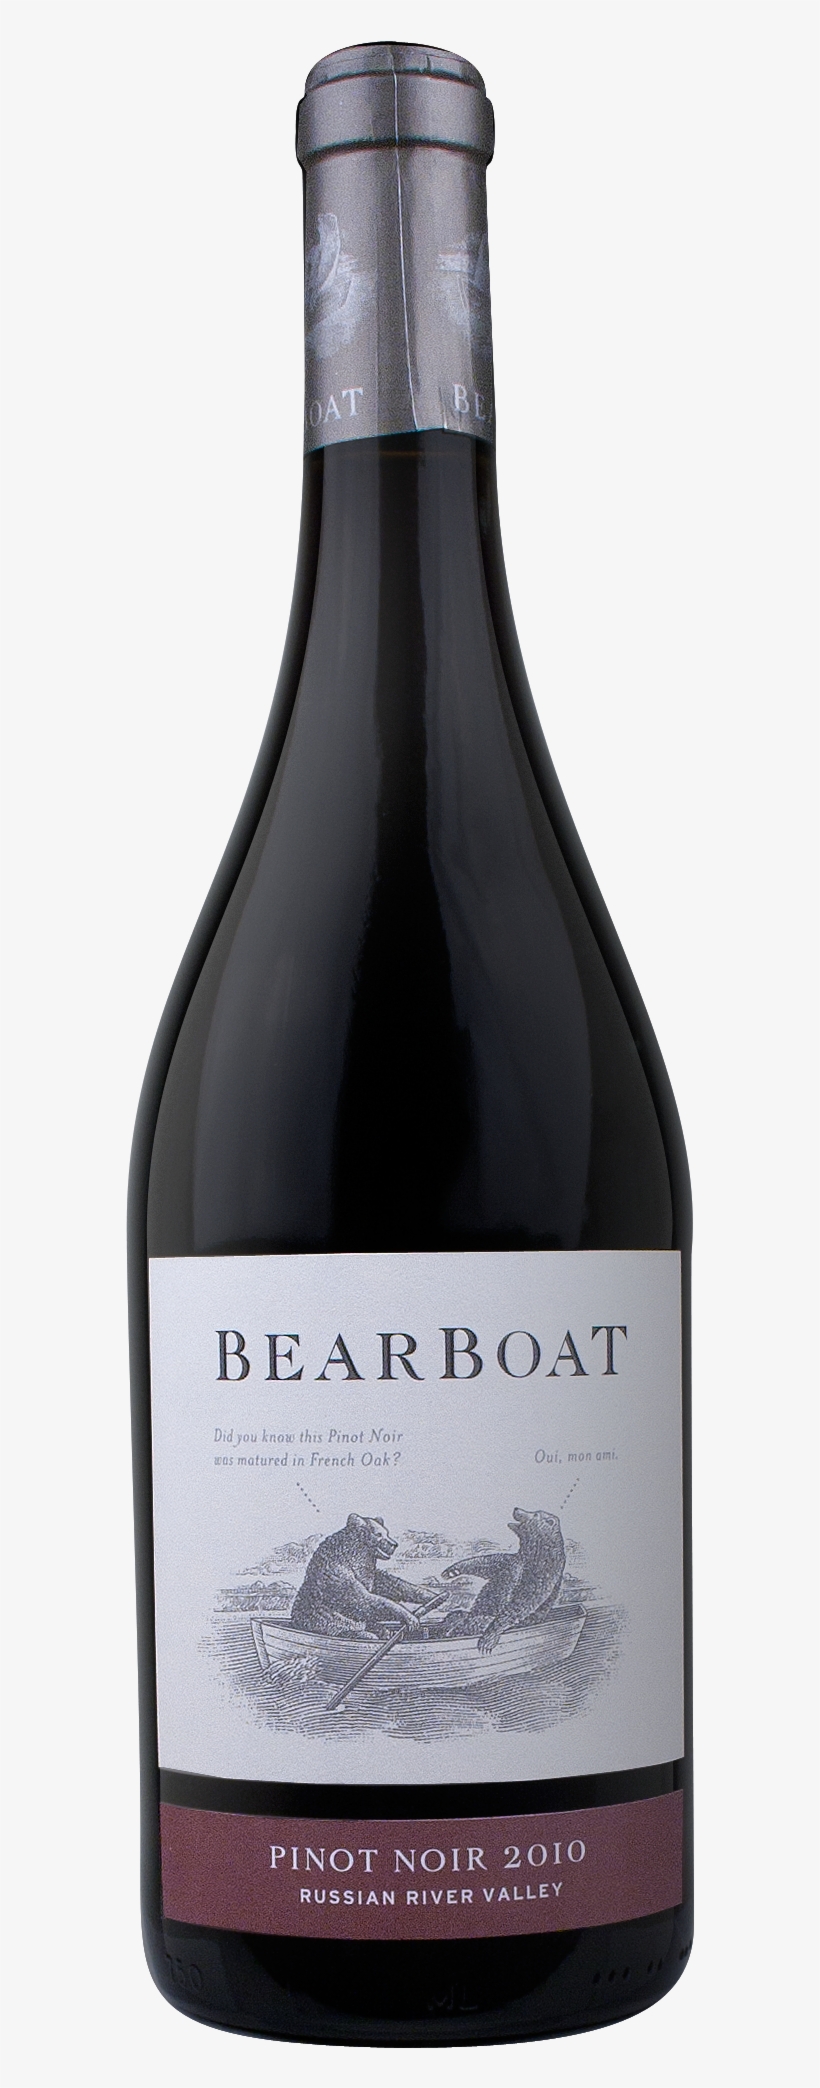 Iphone Label Thumb - Bearboat Pinot Noir Sonoma Coast, transparent png #5021799